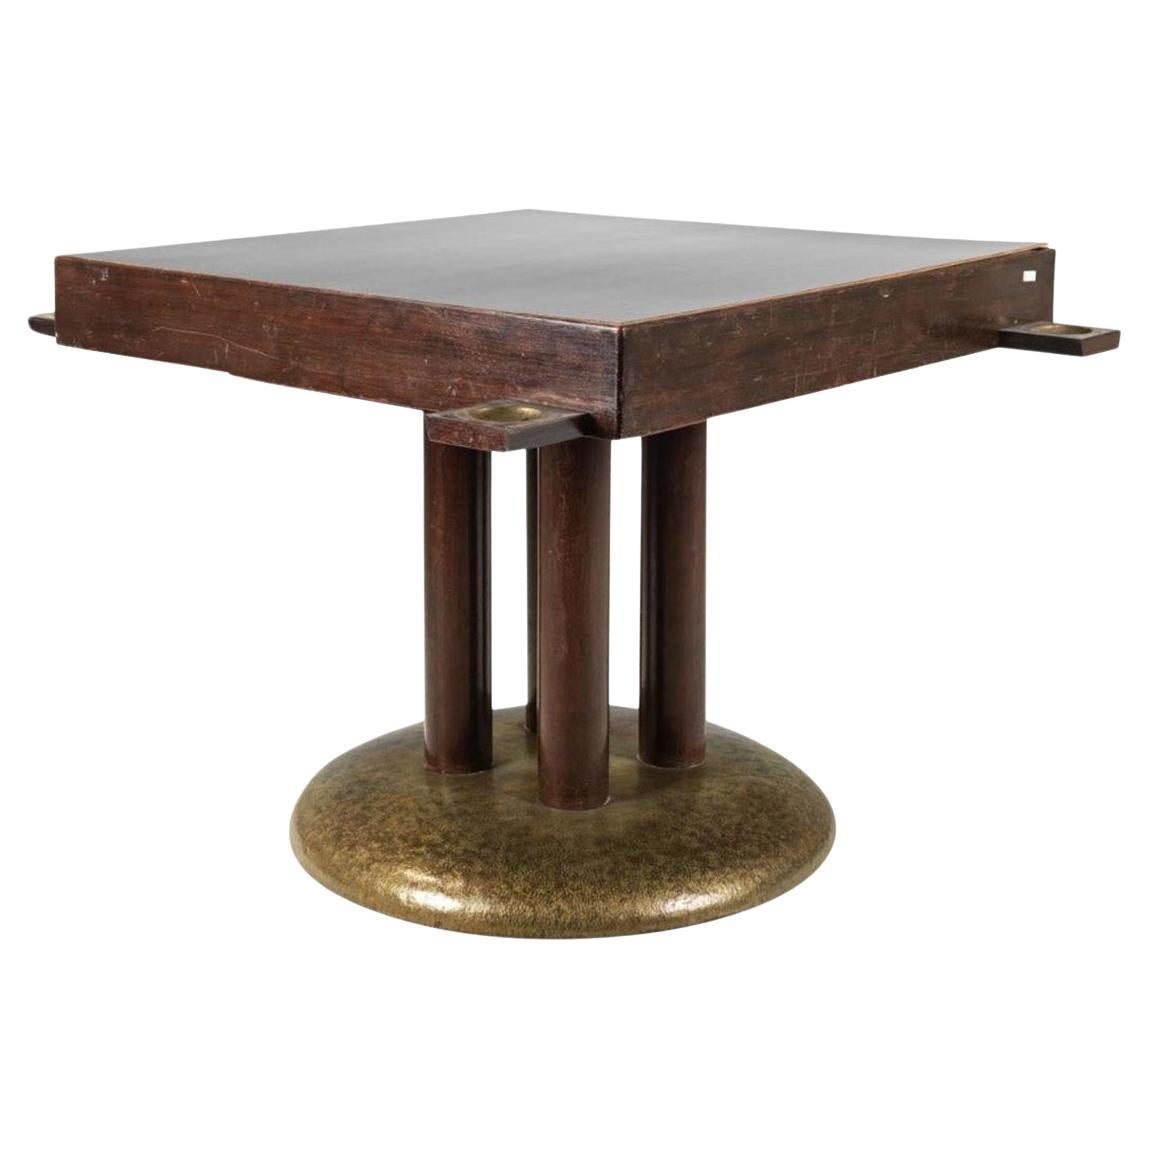 Original Gambling Table in the Style of Adolf Loos 1910 with Brass Chip-Bowls For Sale